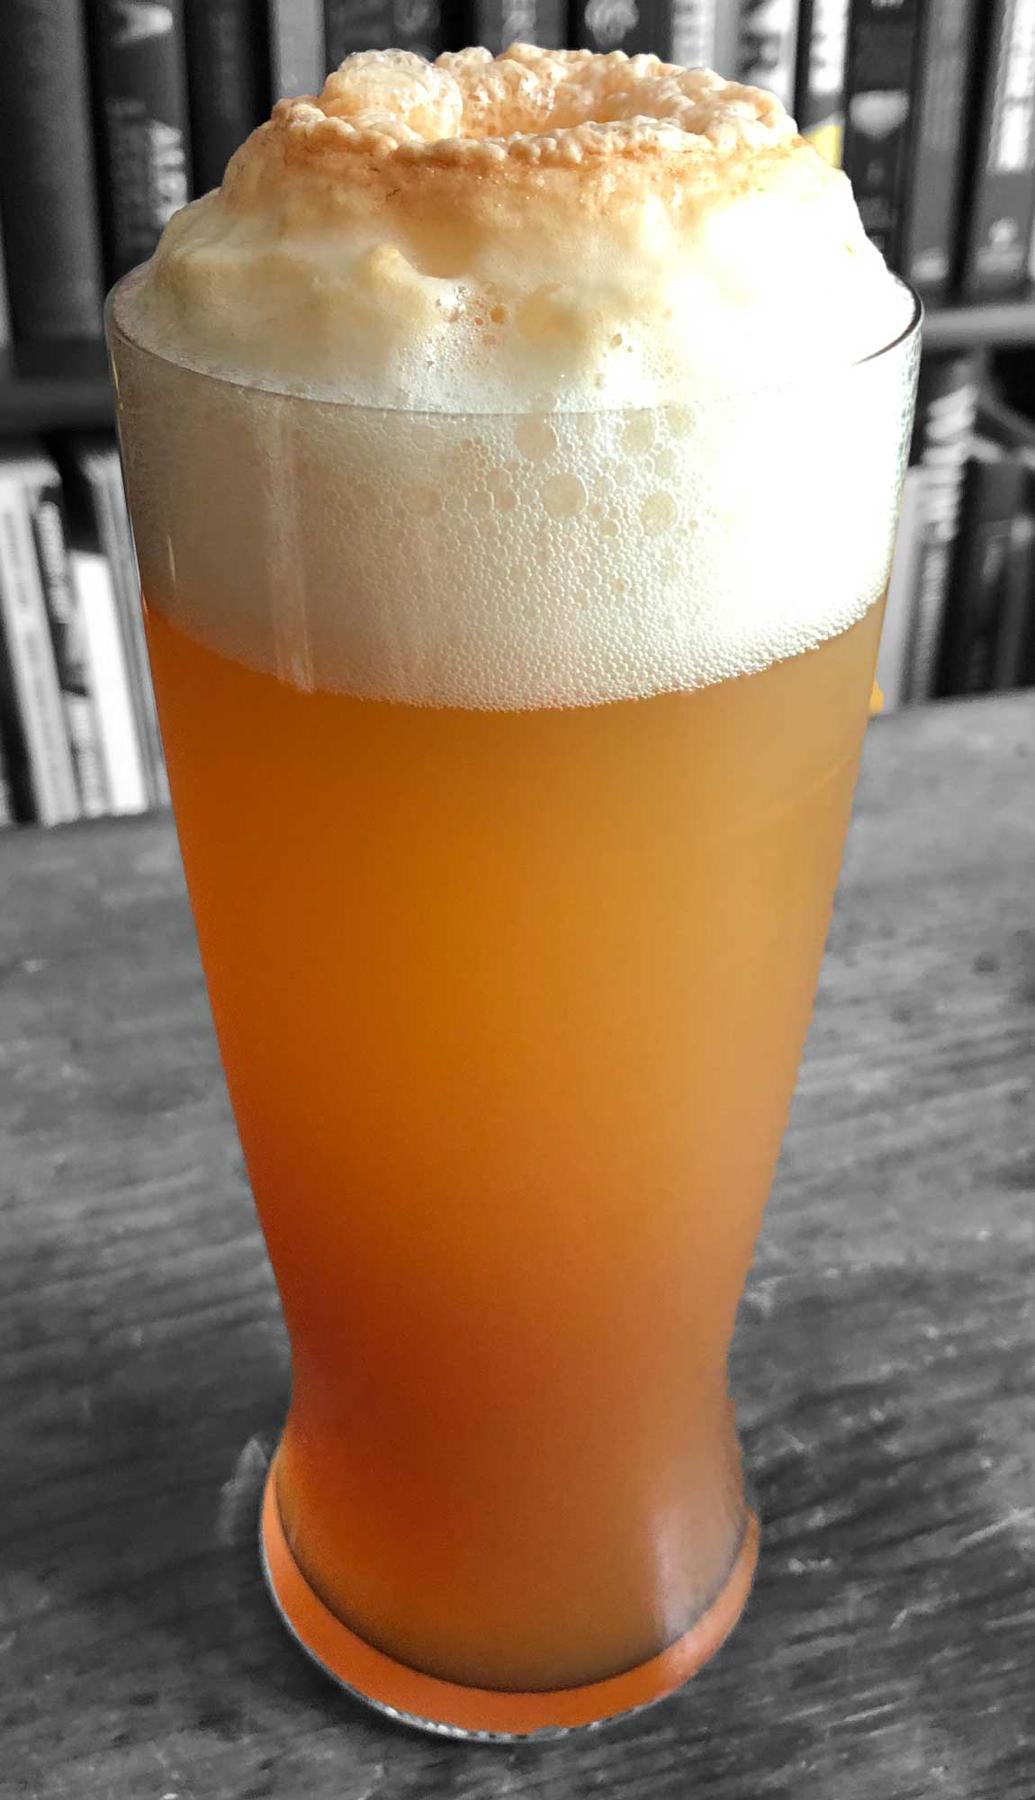 An example of the Draft of Smoke, the mixed drink (drink) featuring grapefruit radler and Amaro Sfumato Rabarbaro; photo by Lee Edwards